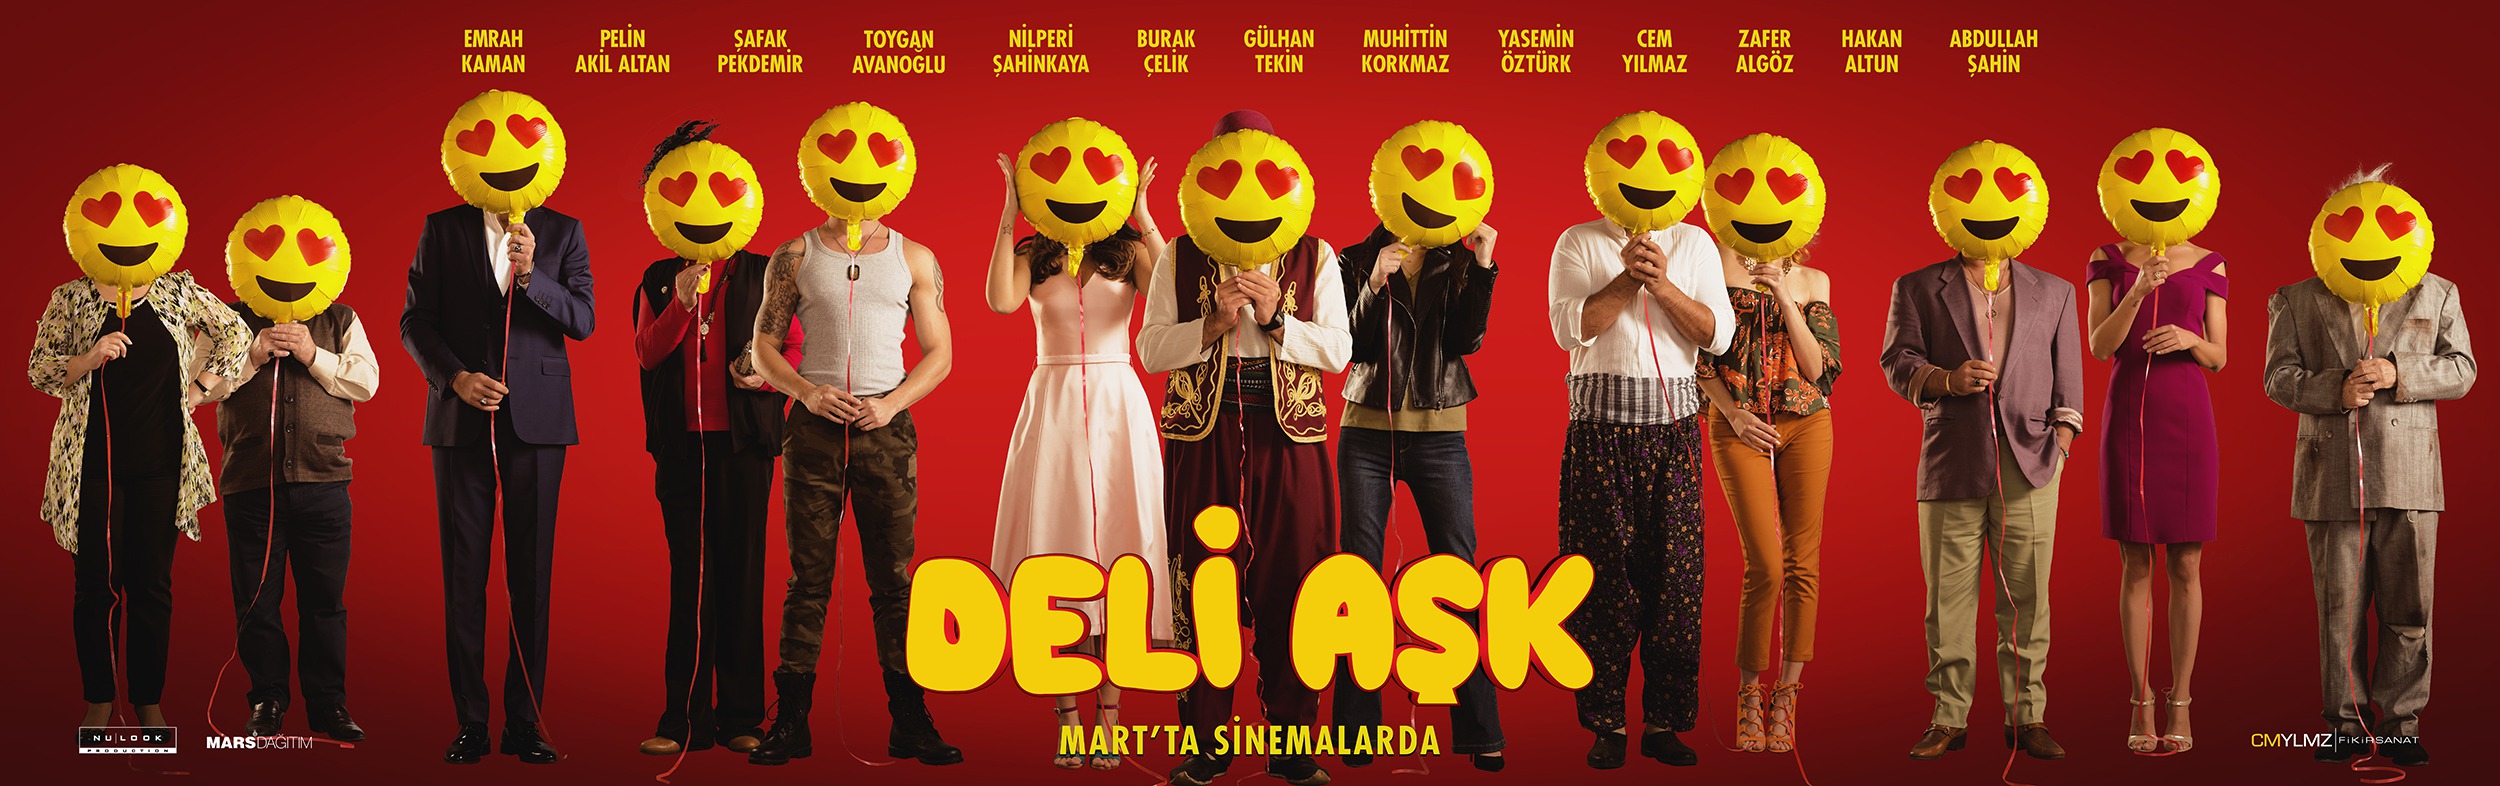 Mega Sized Movie Poster Image for Deli Ask (#7 of 8)